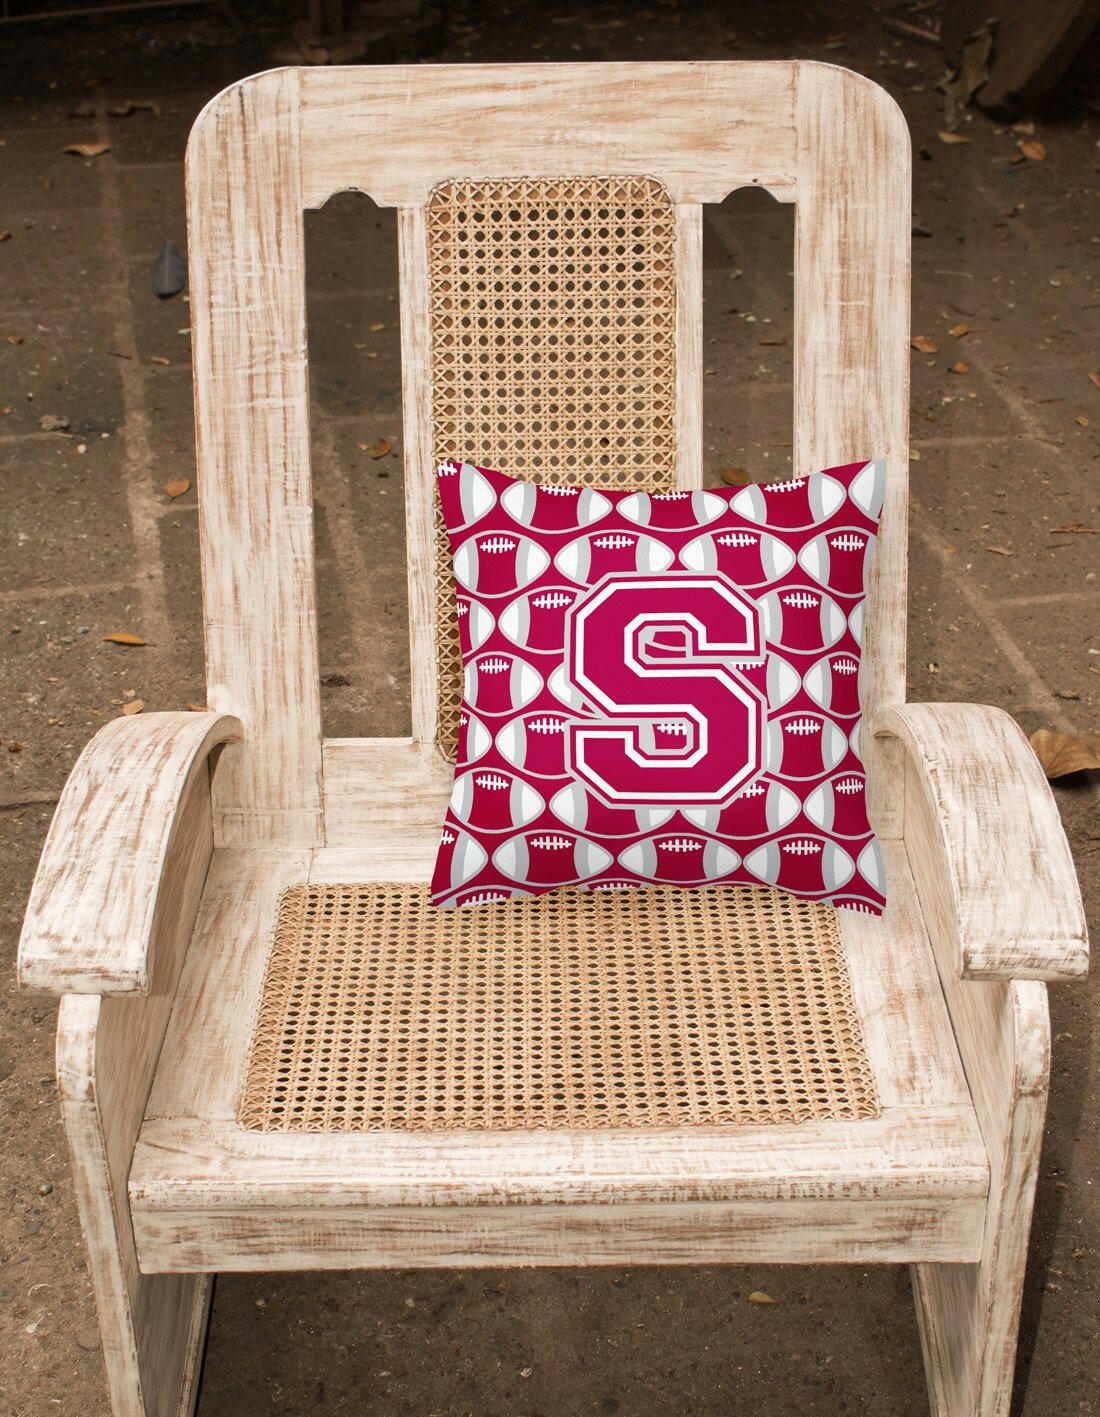 Letter S Football Crimson, grey and white Fabric Decorative Pillow CJ1065-SPW1414 by Caroline's Treasures